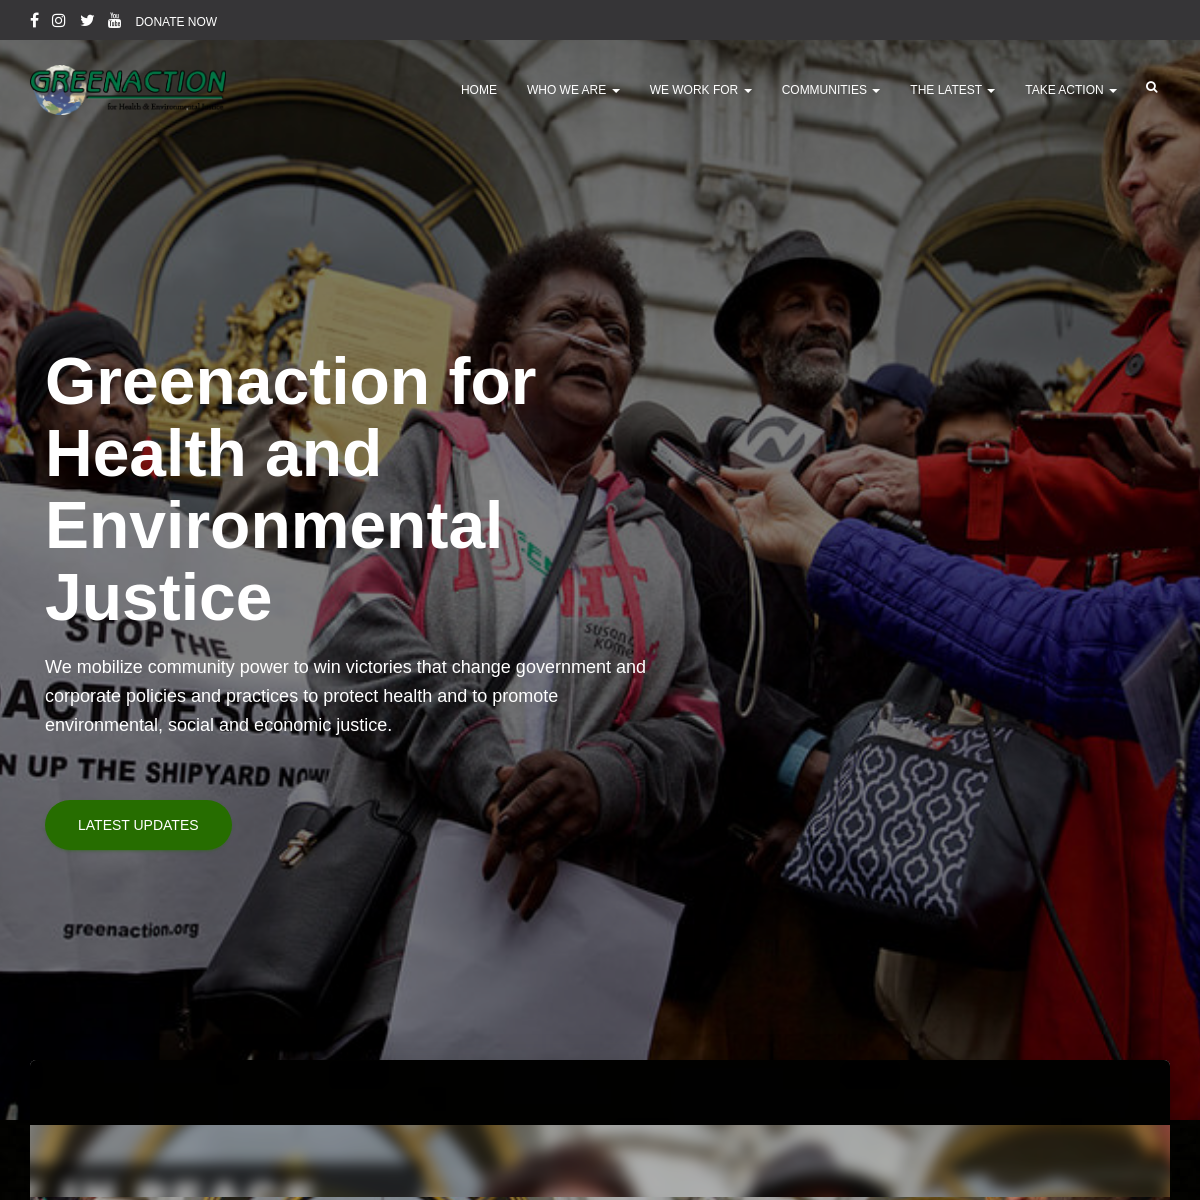 A complete backup of greenaction.org